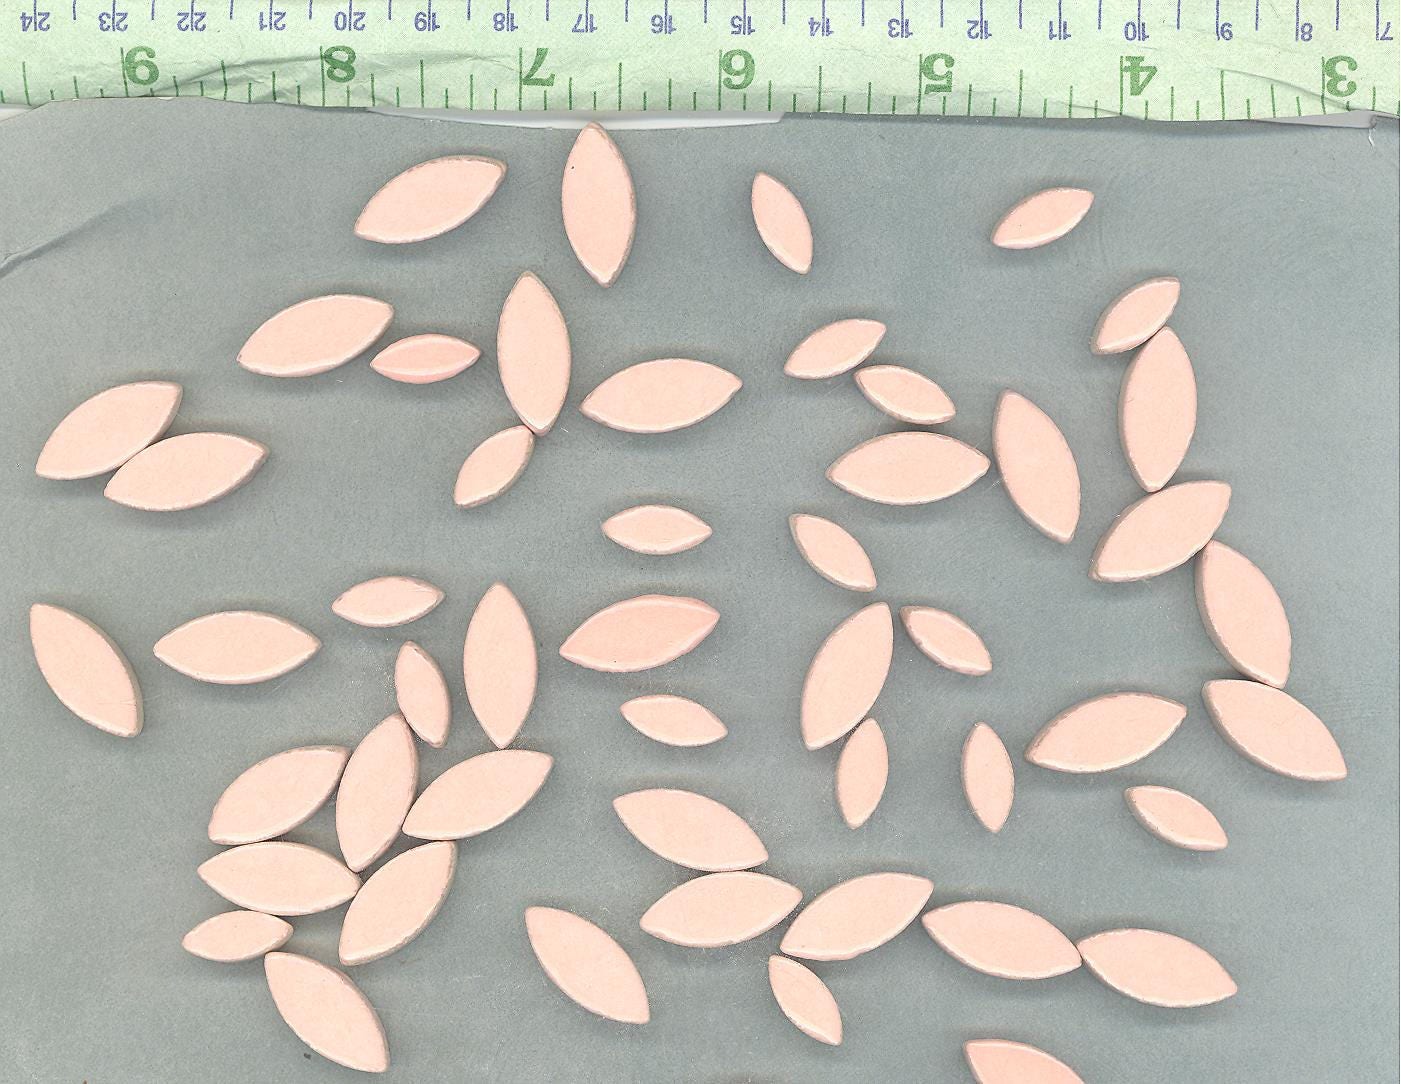 Peach Petals Mosaic Tiles - 50g Ceramic Leaves in Mix of 2 Sizes 1/2" and 3/4" - Pale Light Orange